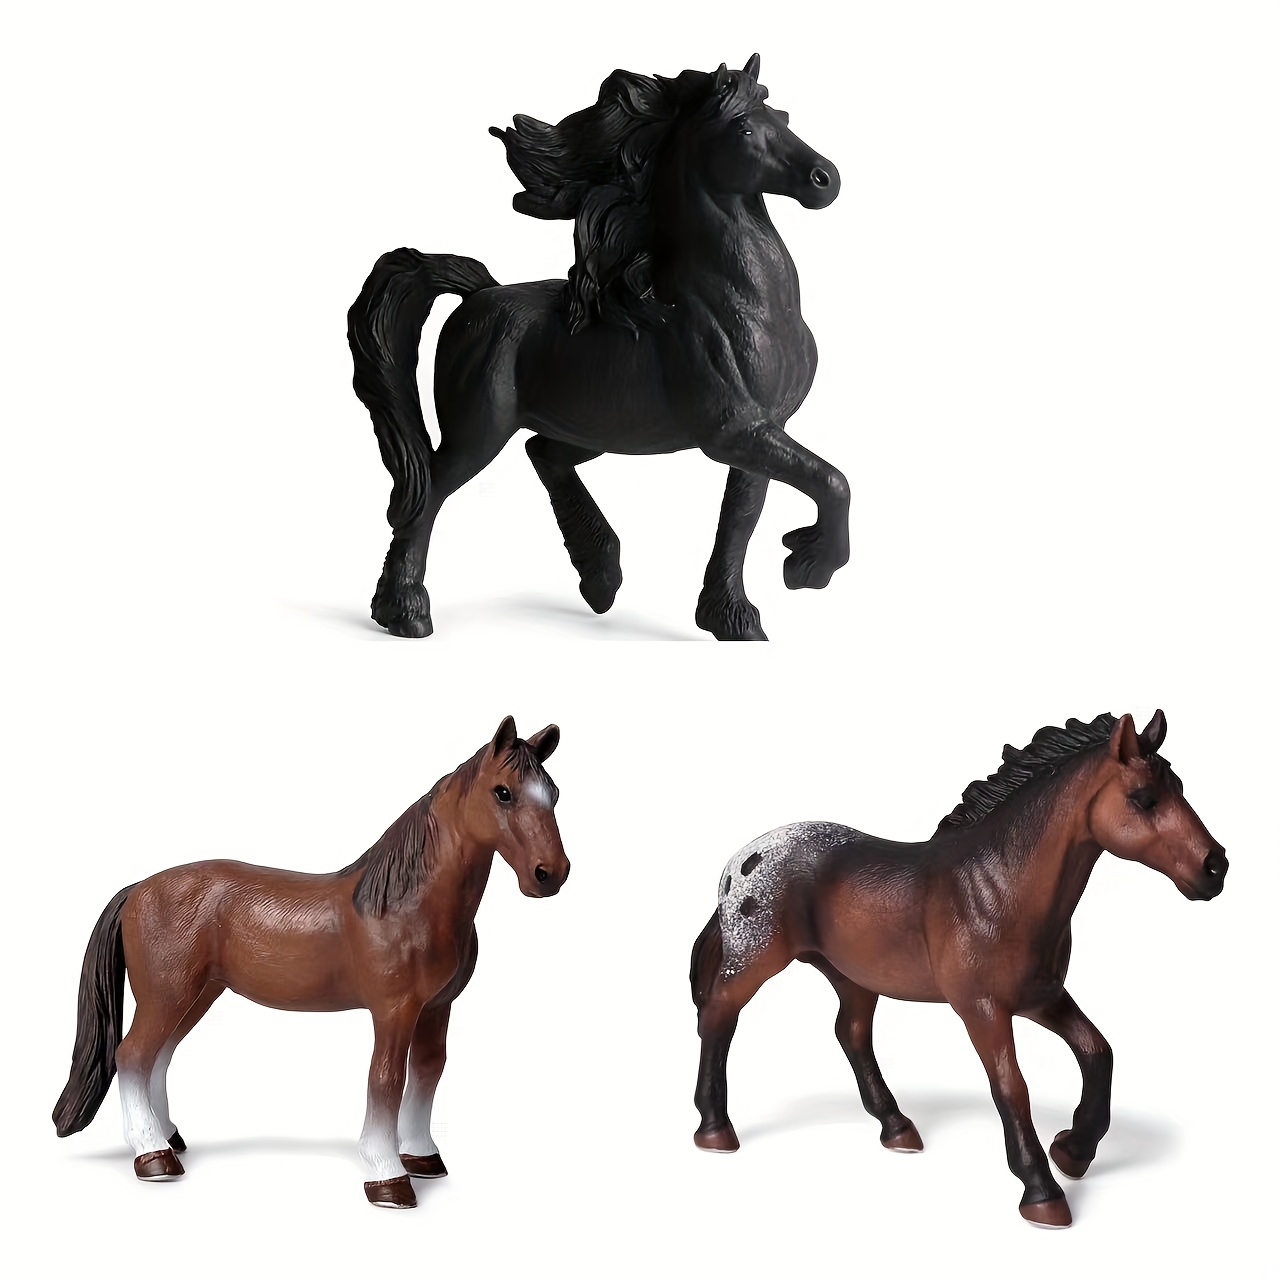 

Classic American Clydesdale Horse Action Figures - Wild Steed Farm Animal Pvc Figurines For Kids La Ferme